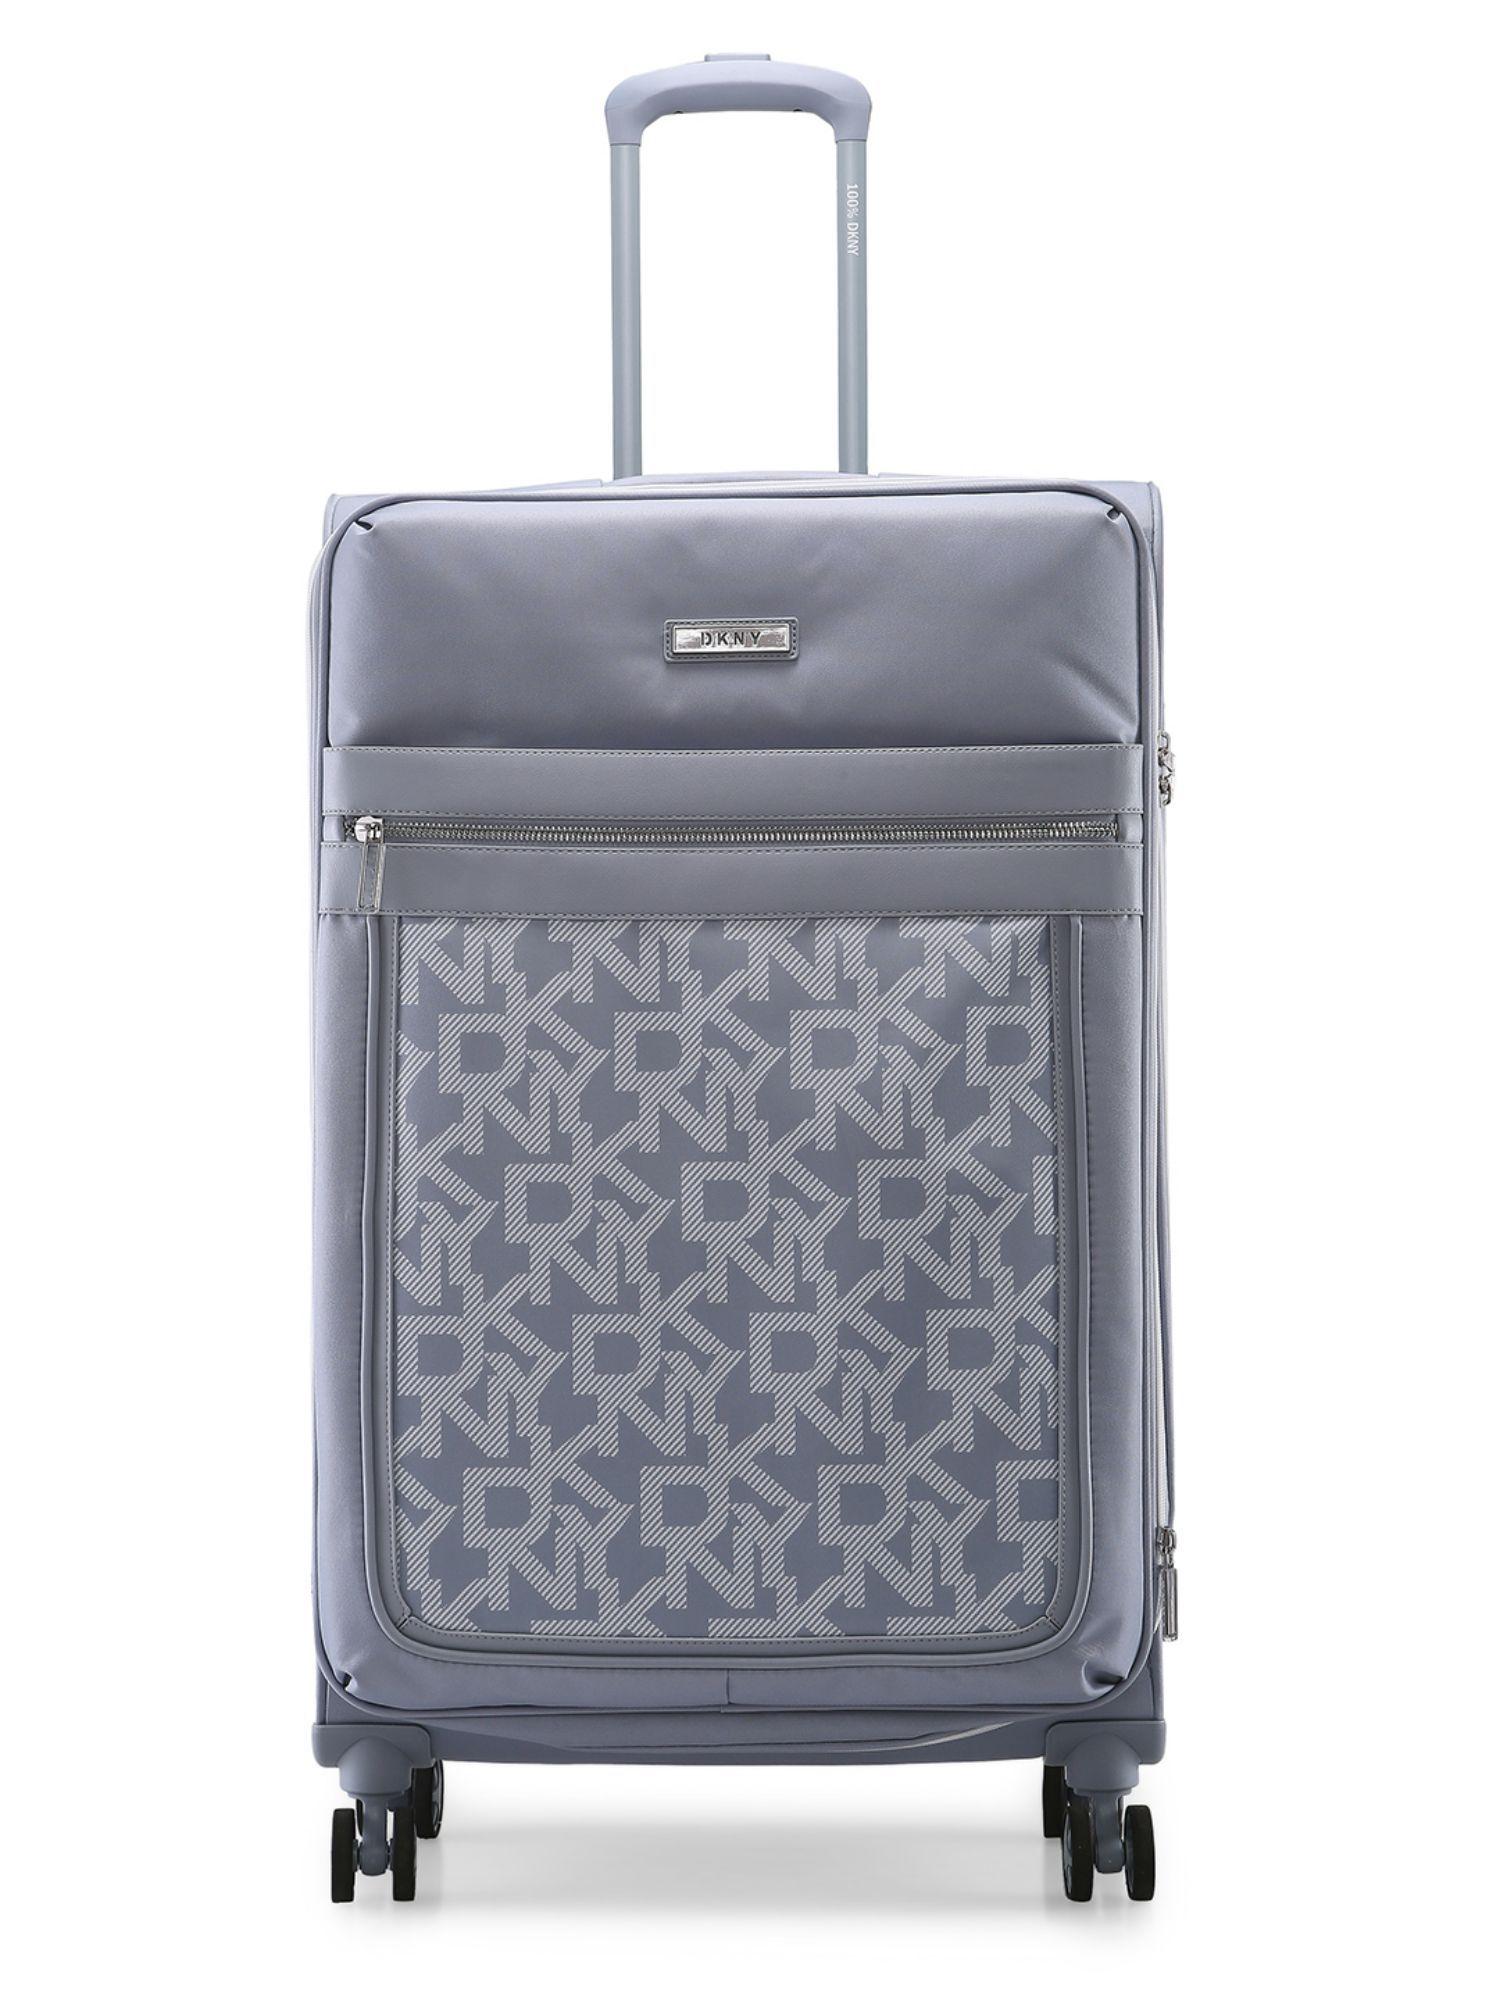 after-hours-strom-grey-soft-side-polyester-twill-material-21-cabin-trolley